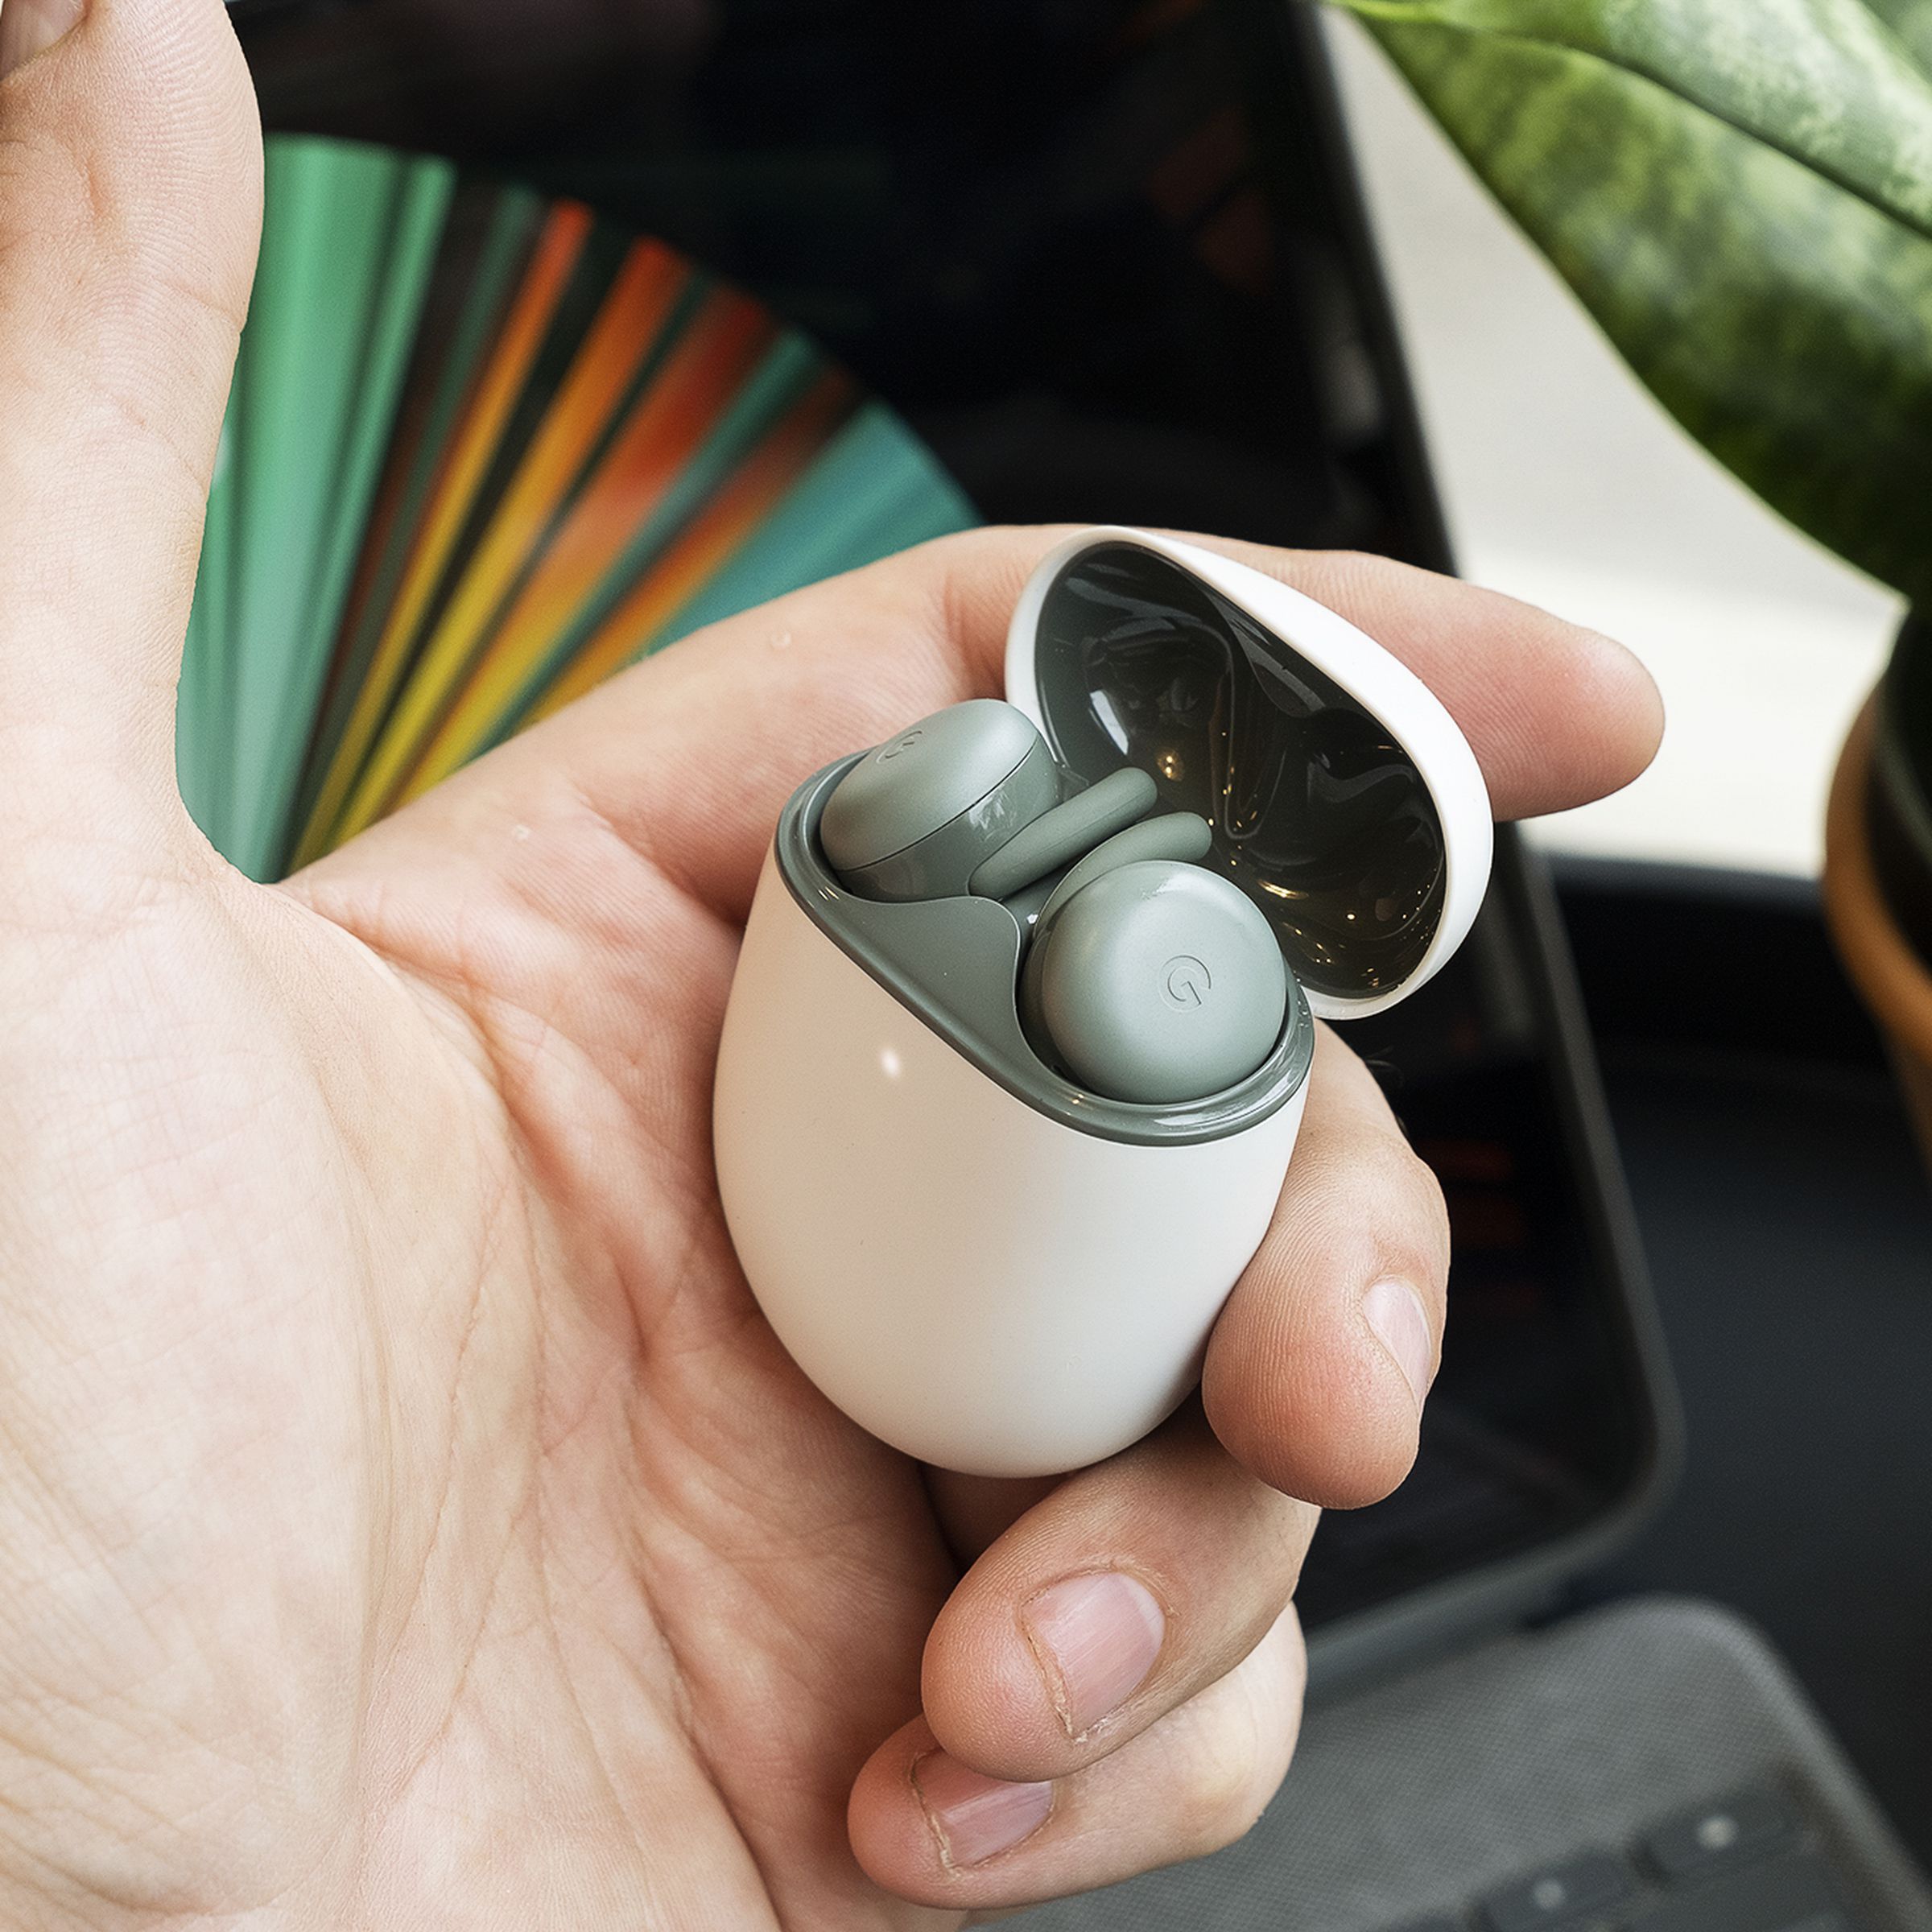 The new Pixel Buds A are available in a dark green color